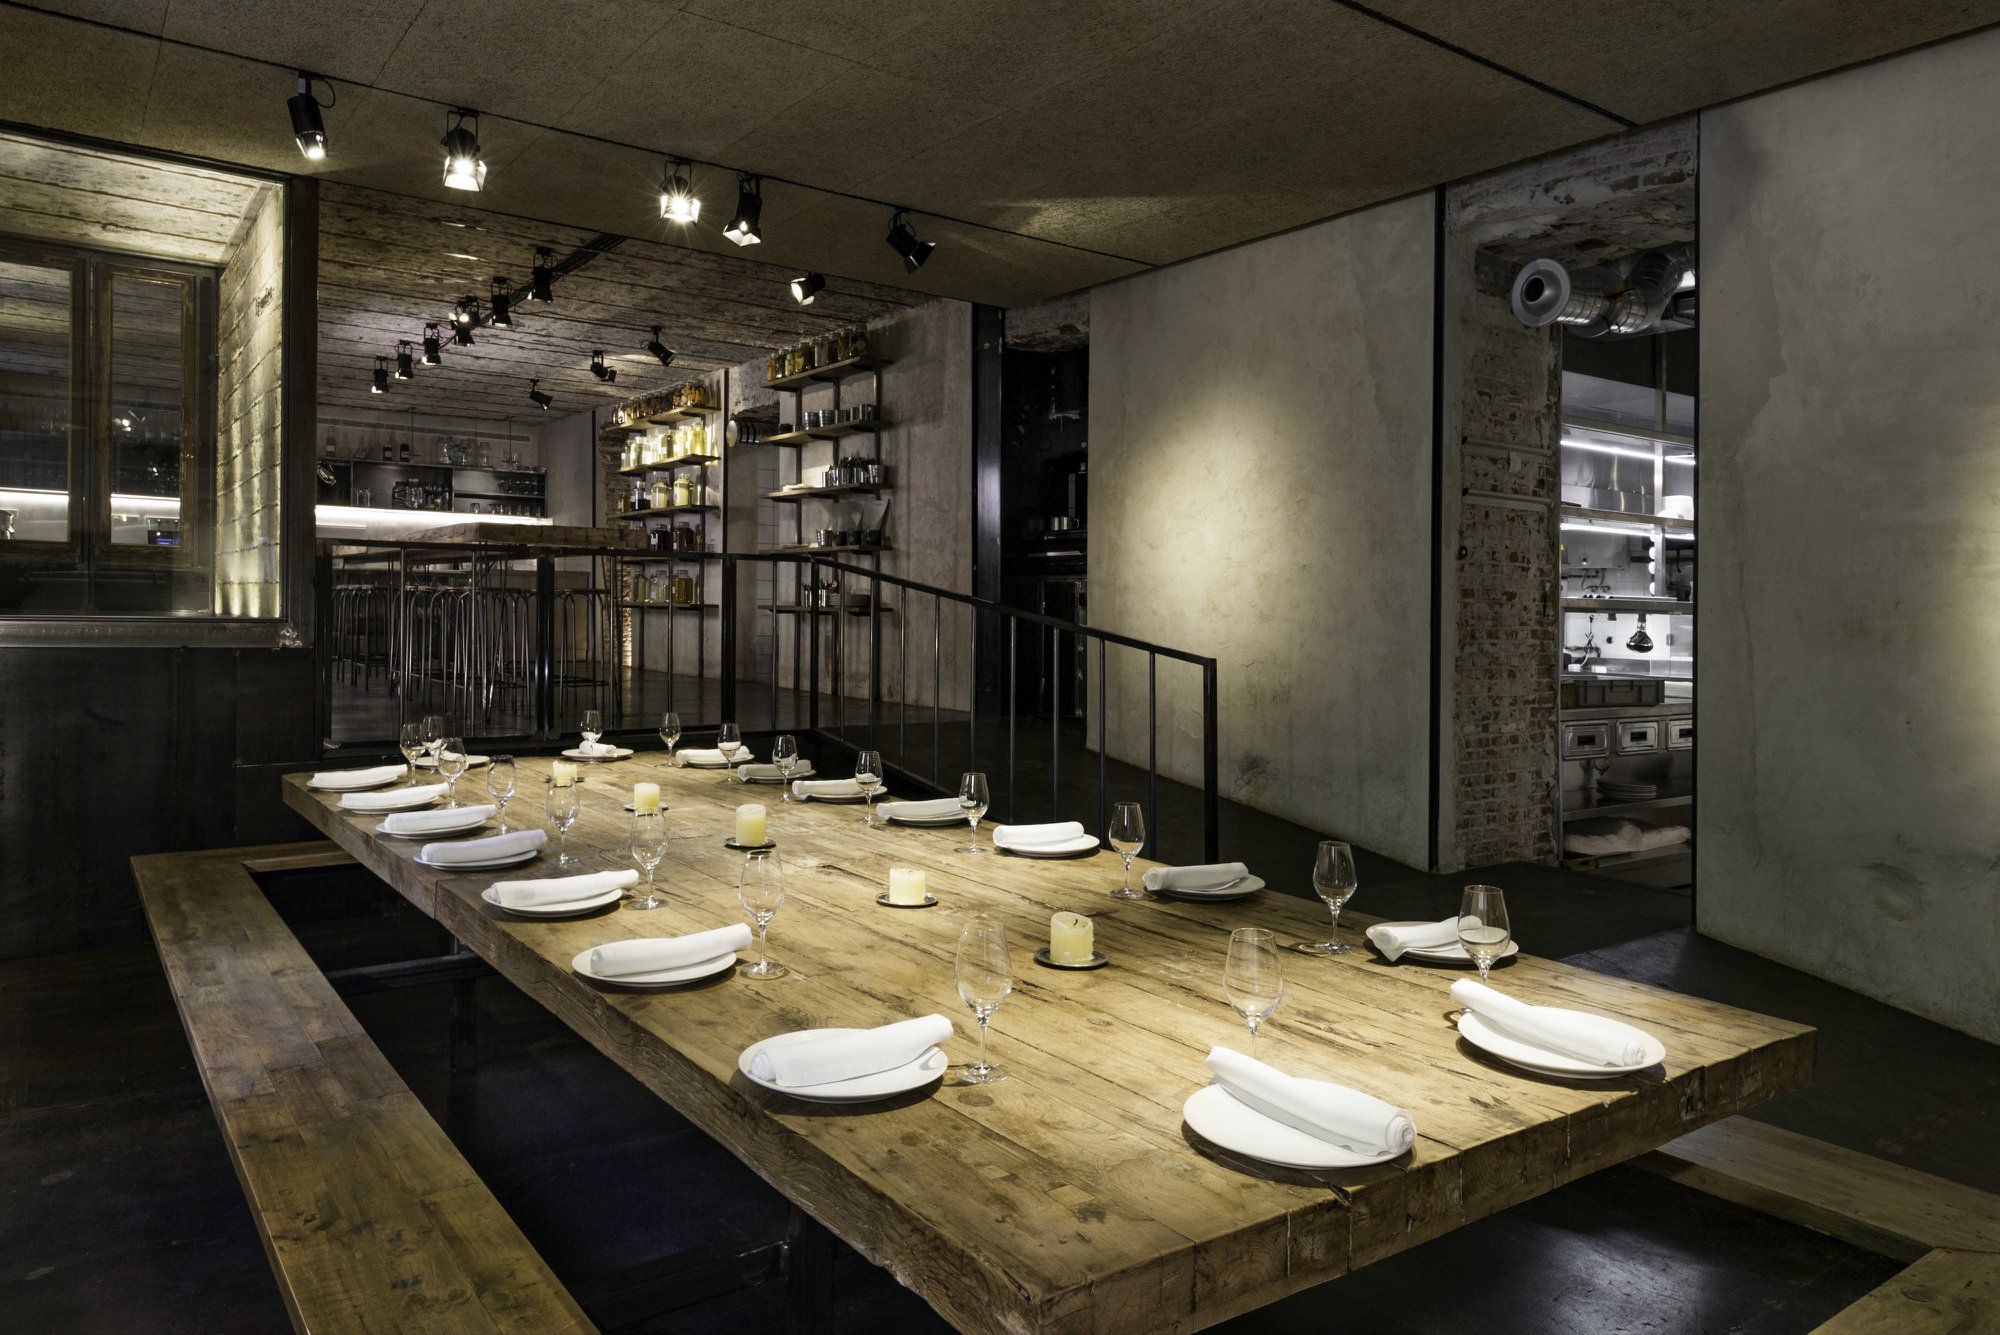 foodie experience at madrids fismuler restaurant traditional and contemporary cuisine